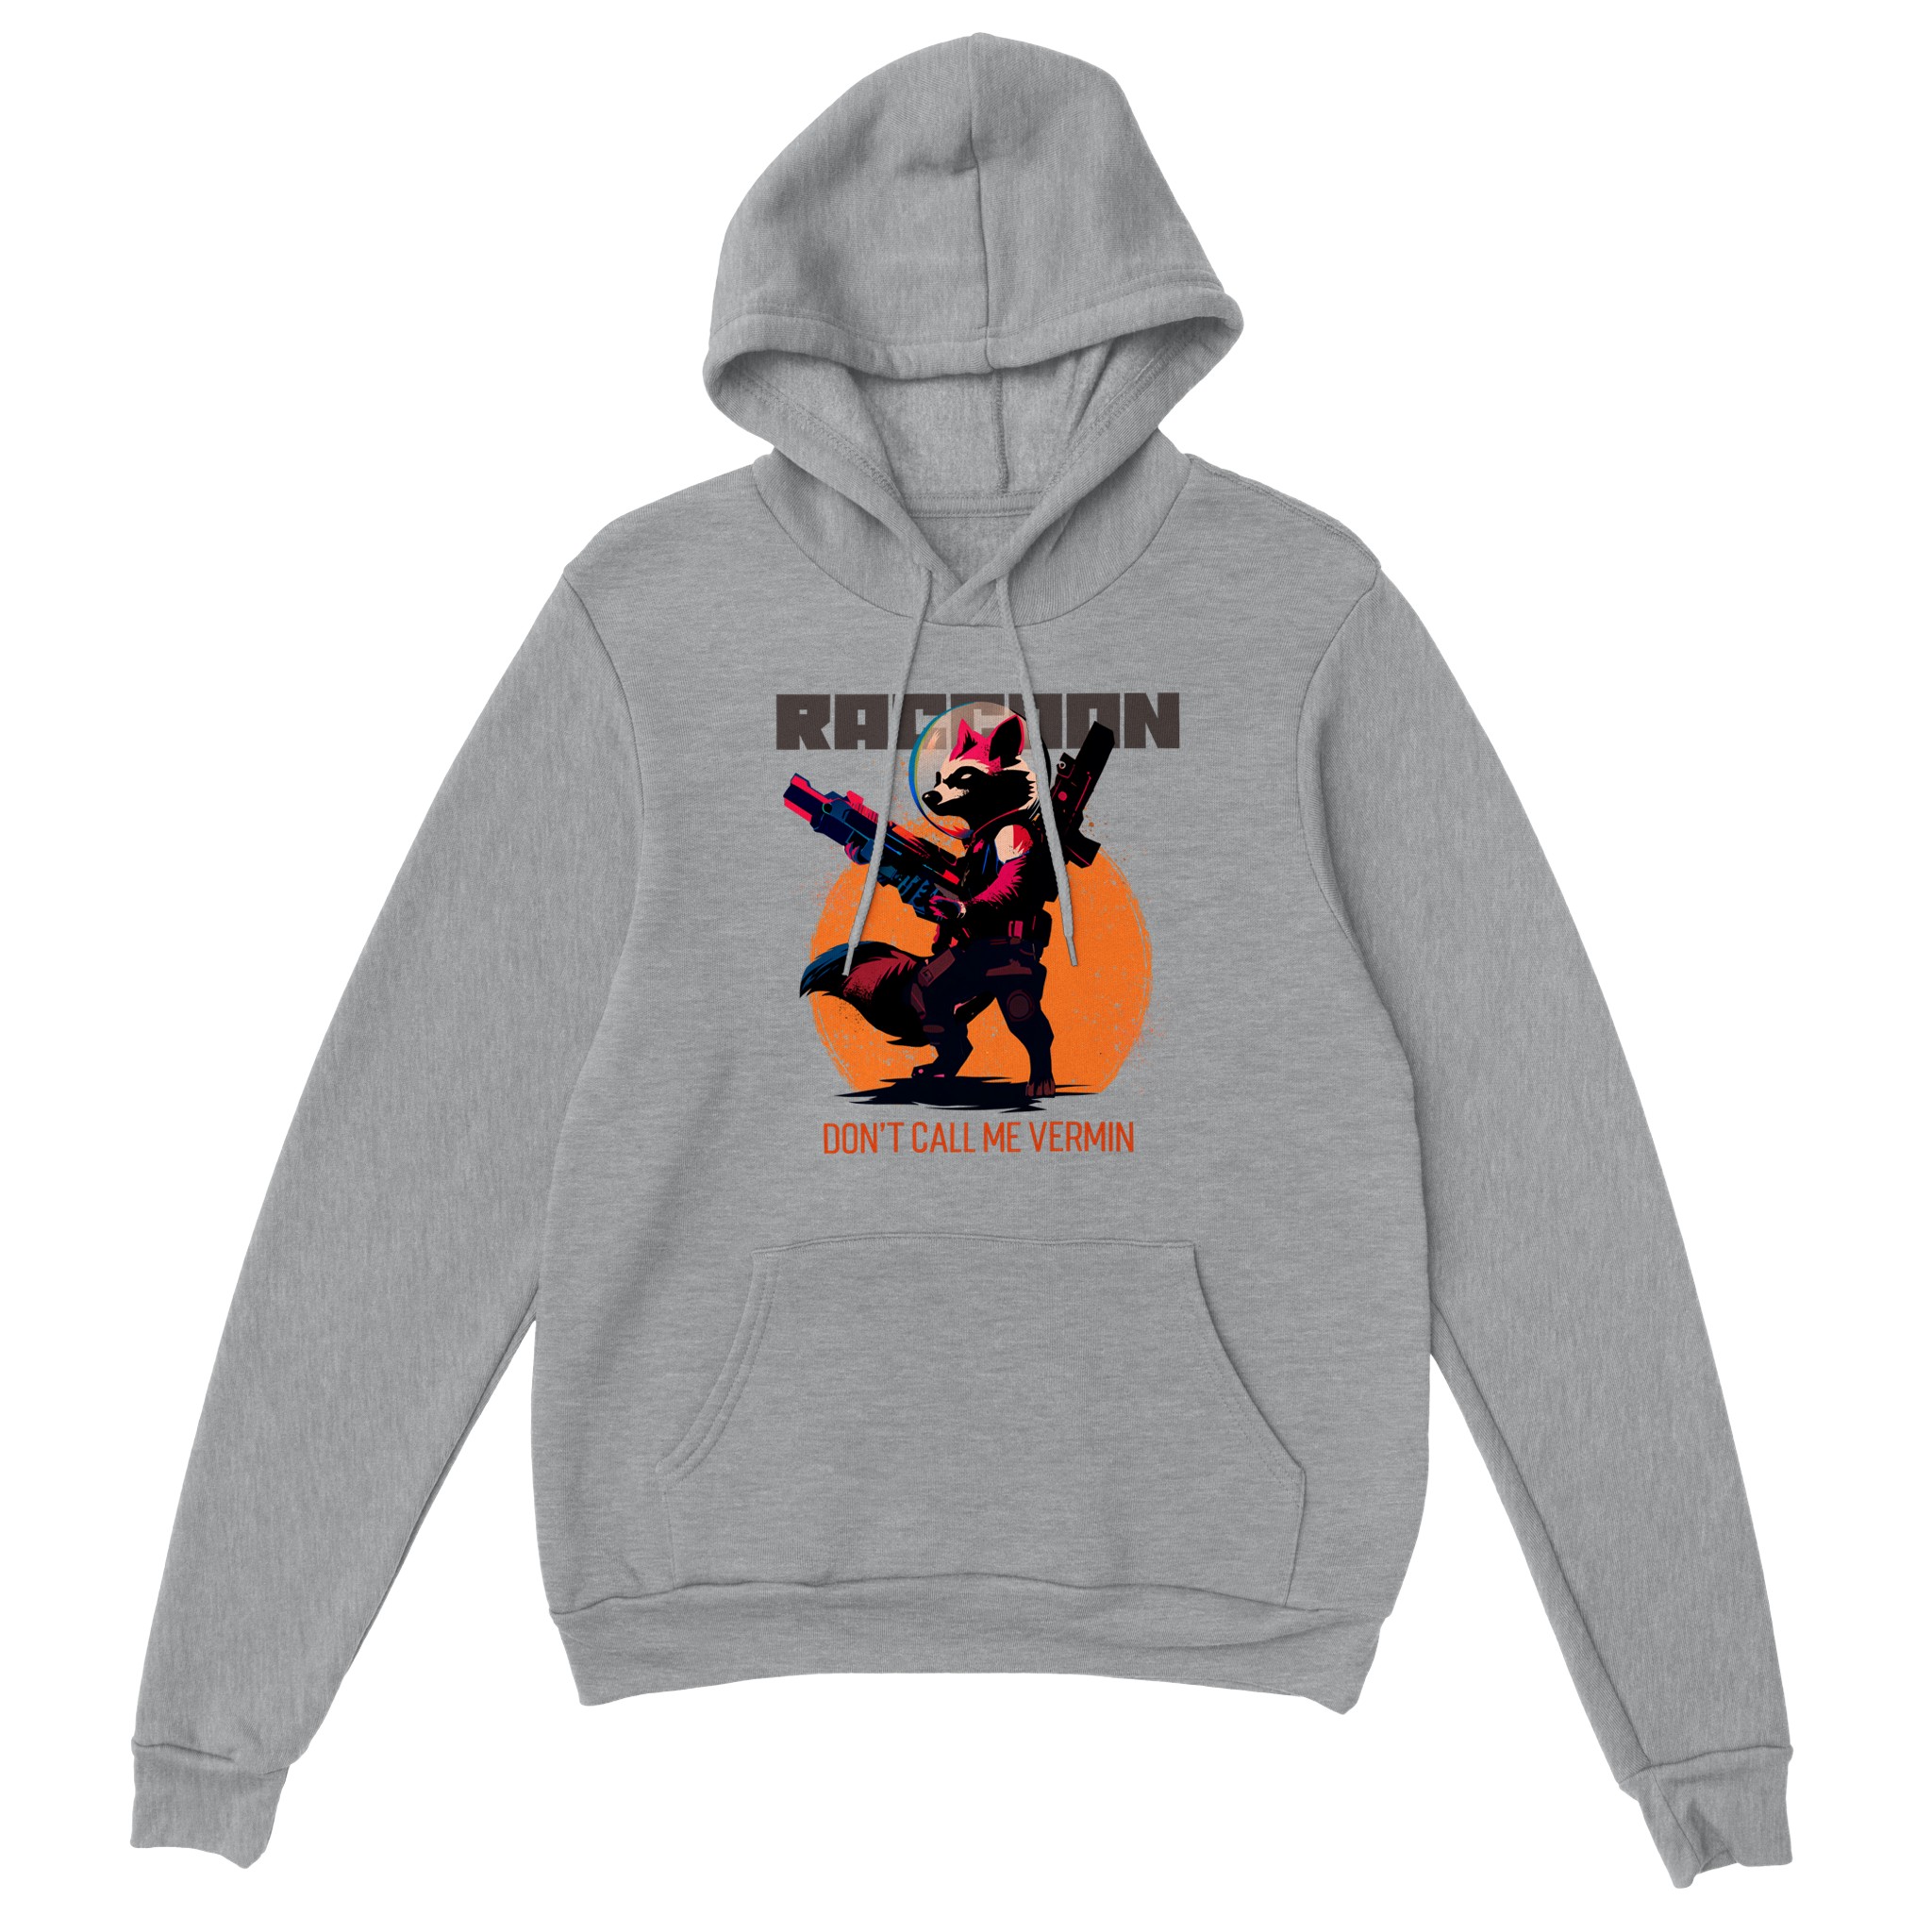 dont call me vermin design on a hoodie